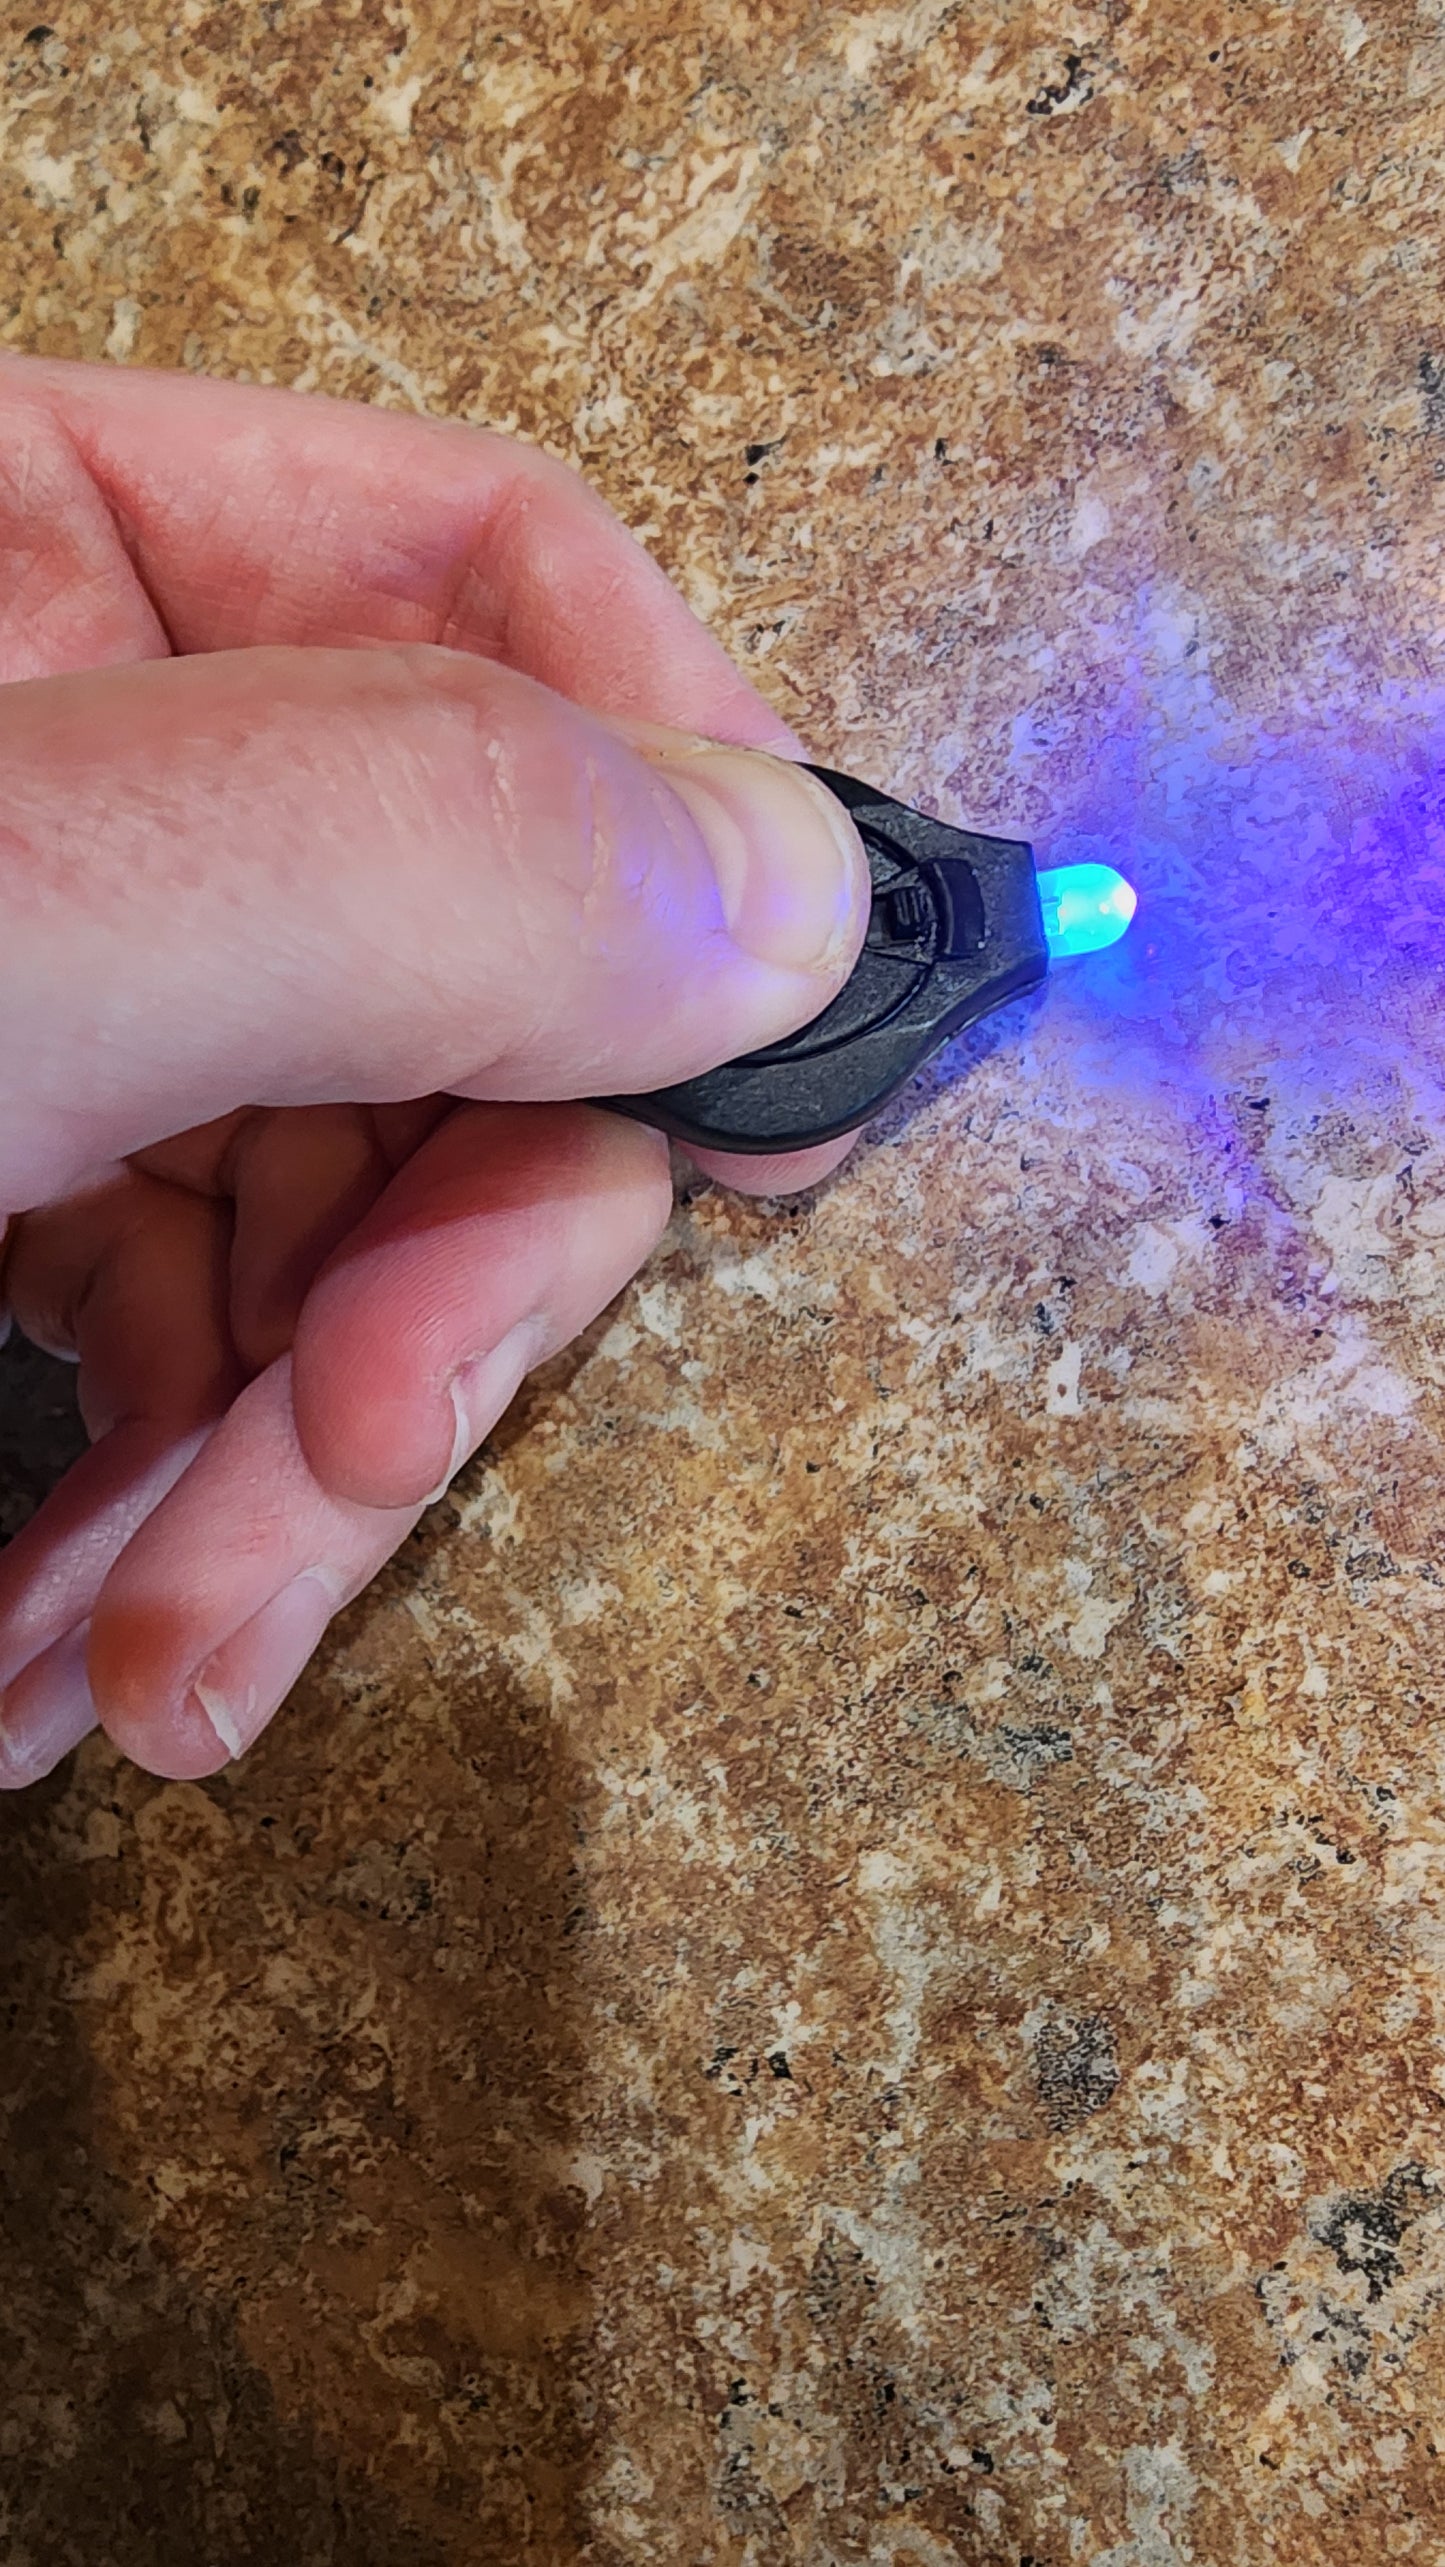 Mini UV Flashlight Keychain for charging glow toppers